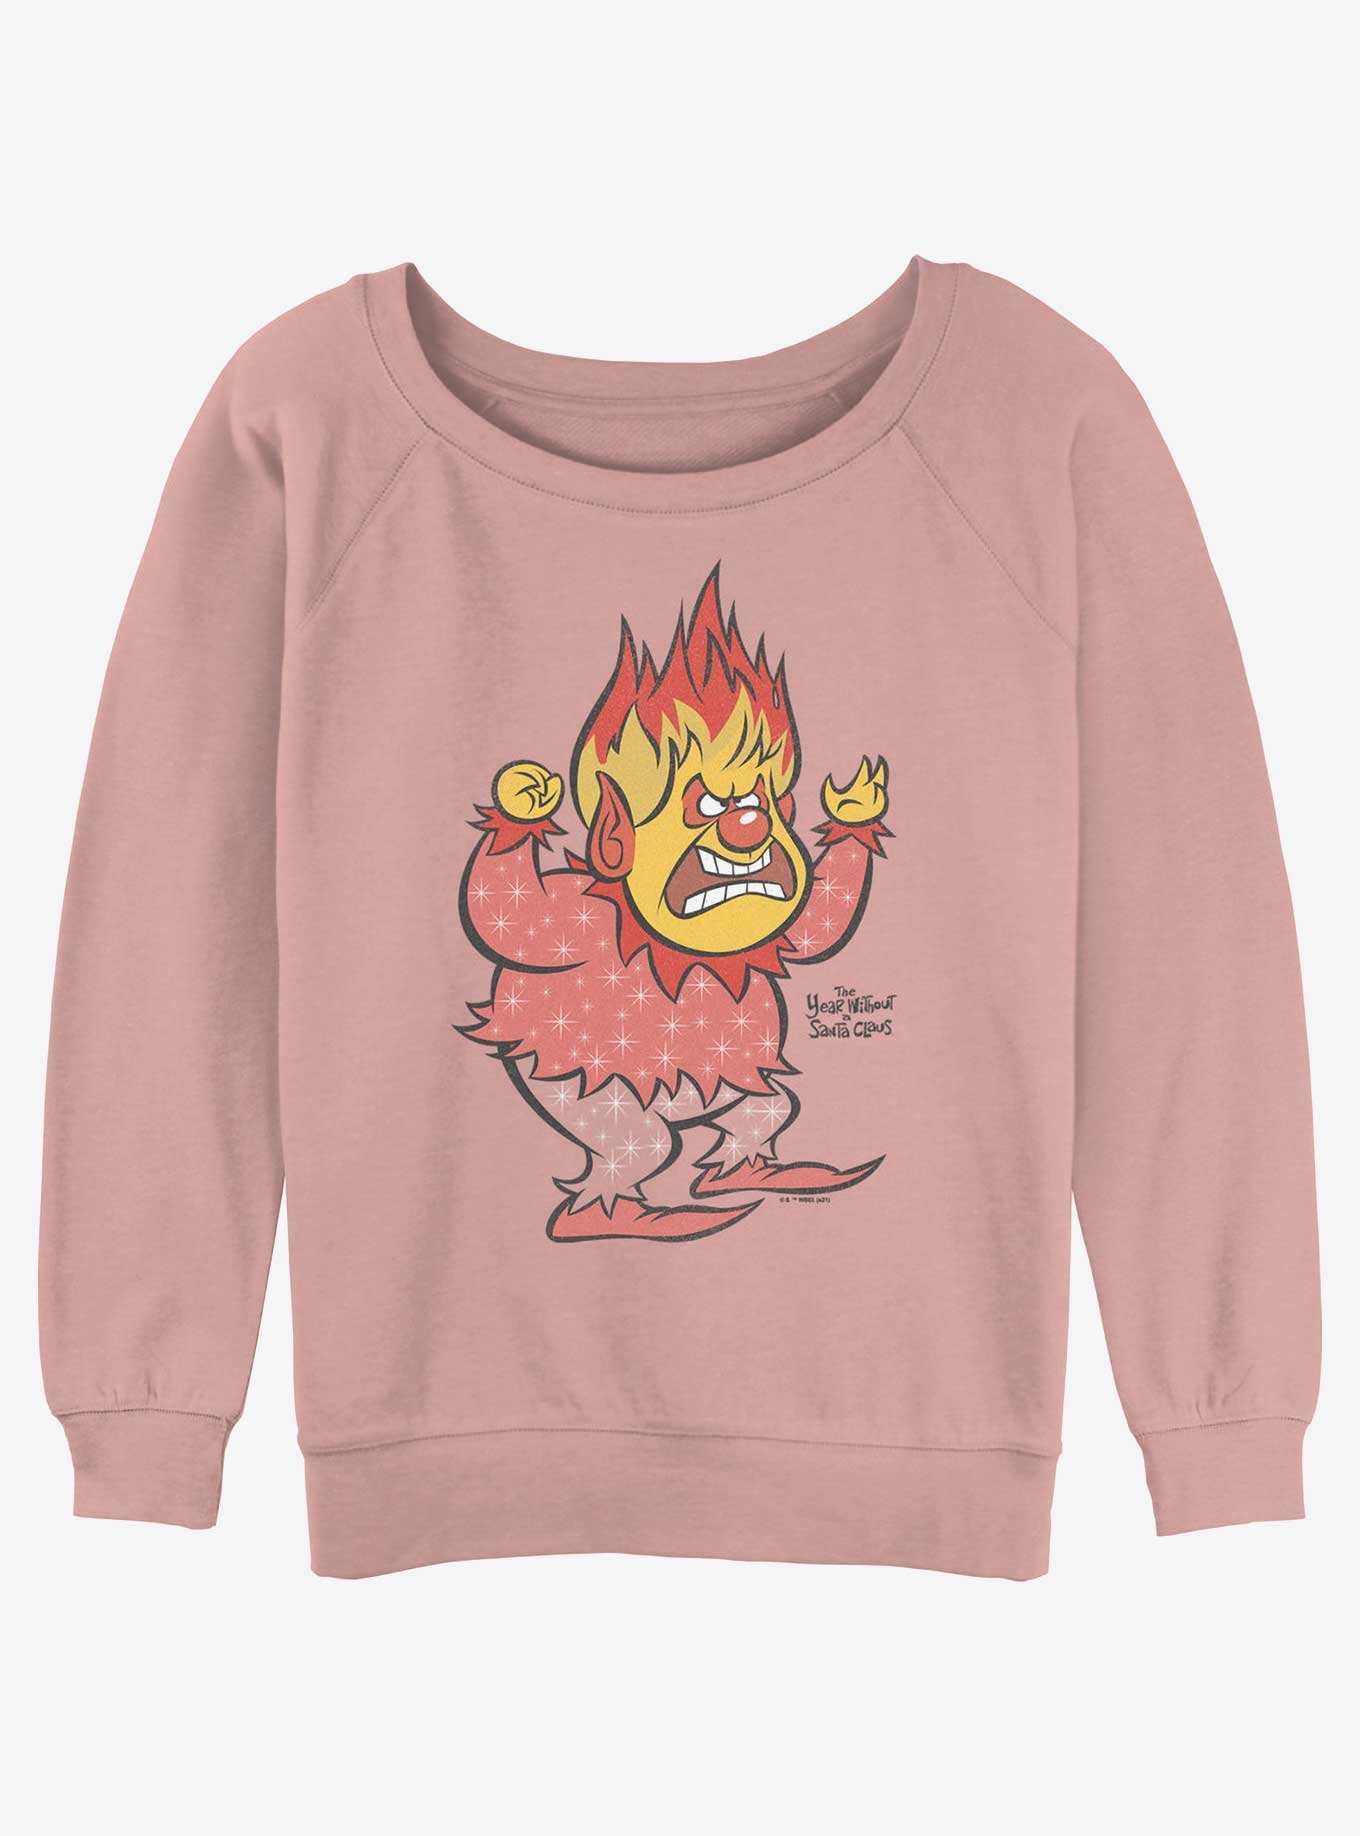 The Year Without a Santa Claus Vintage Heat Miser Girls Slouchy Sweatshirt, , hi-res